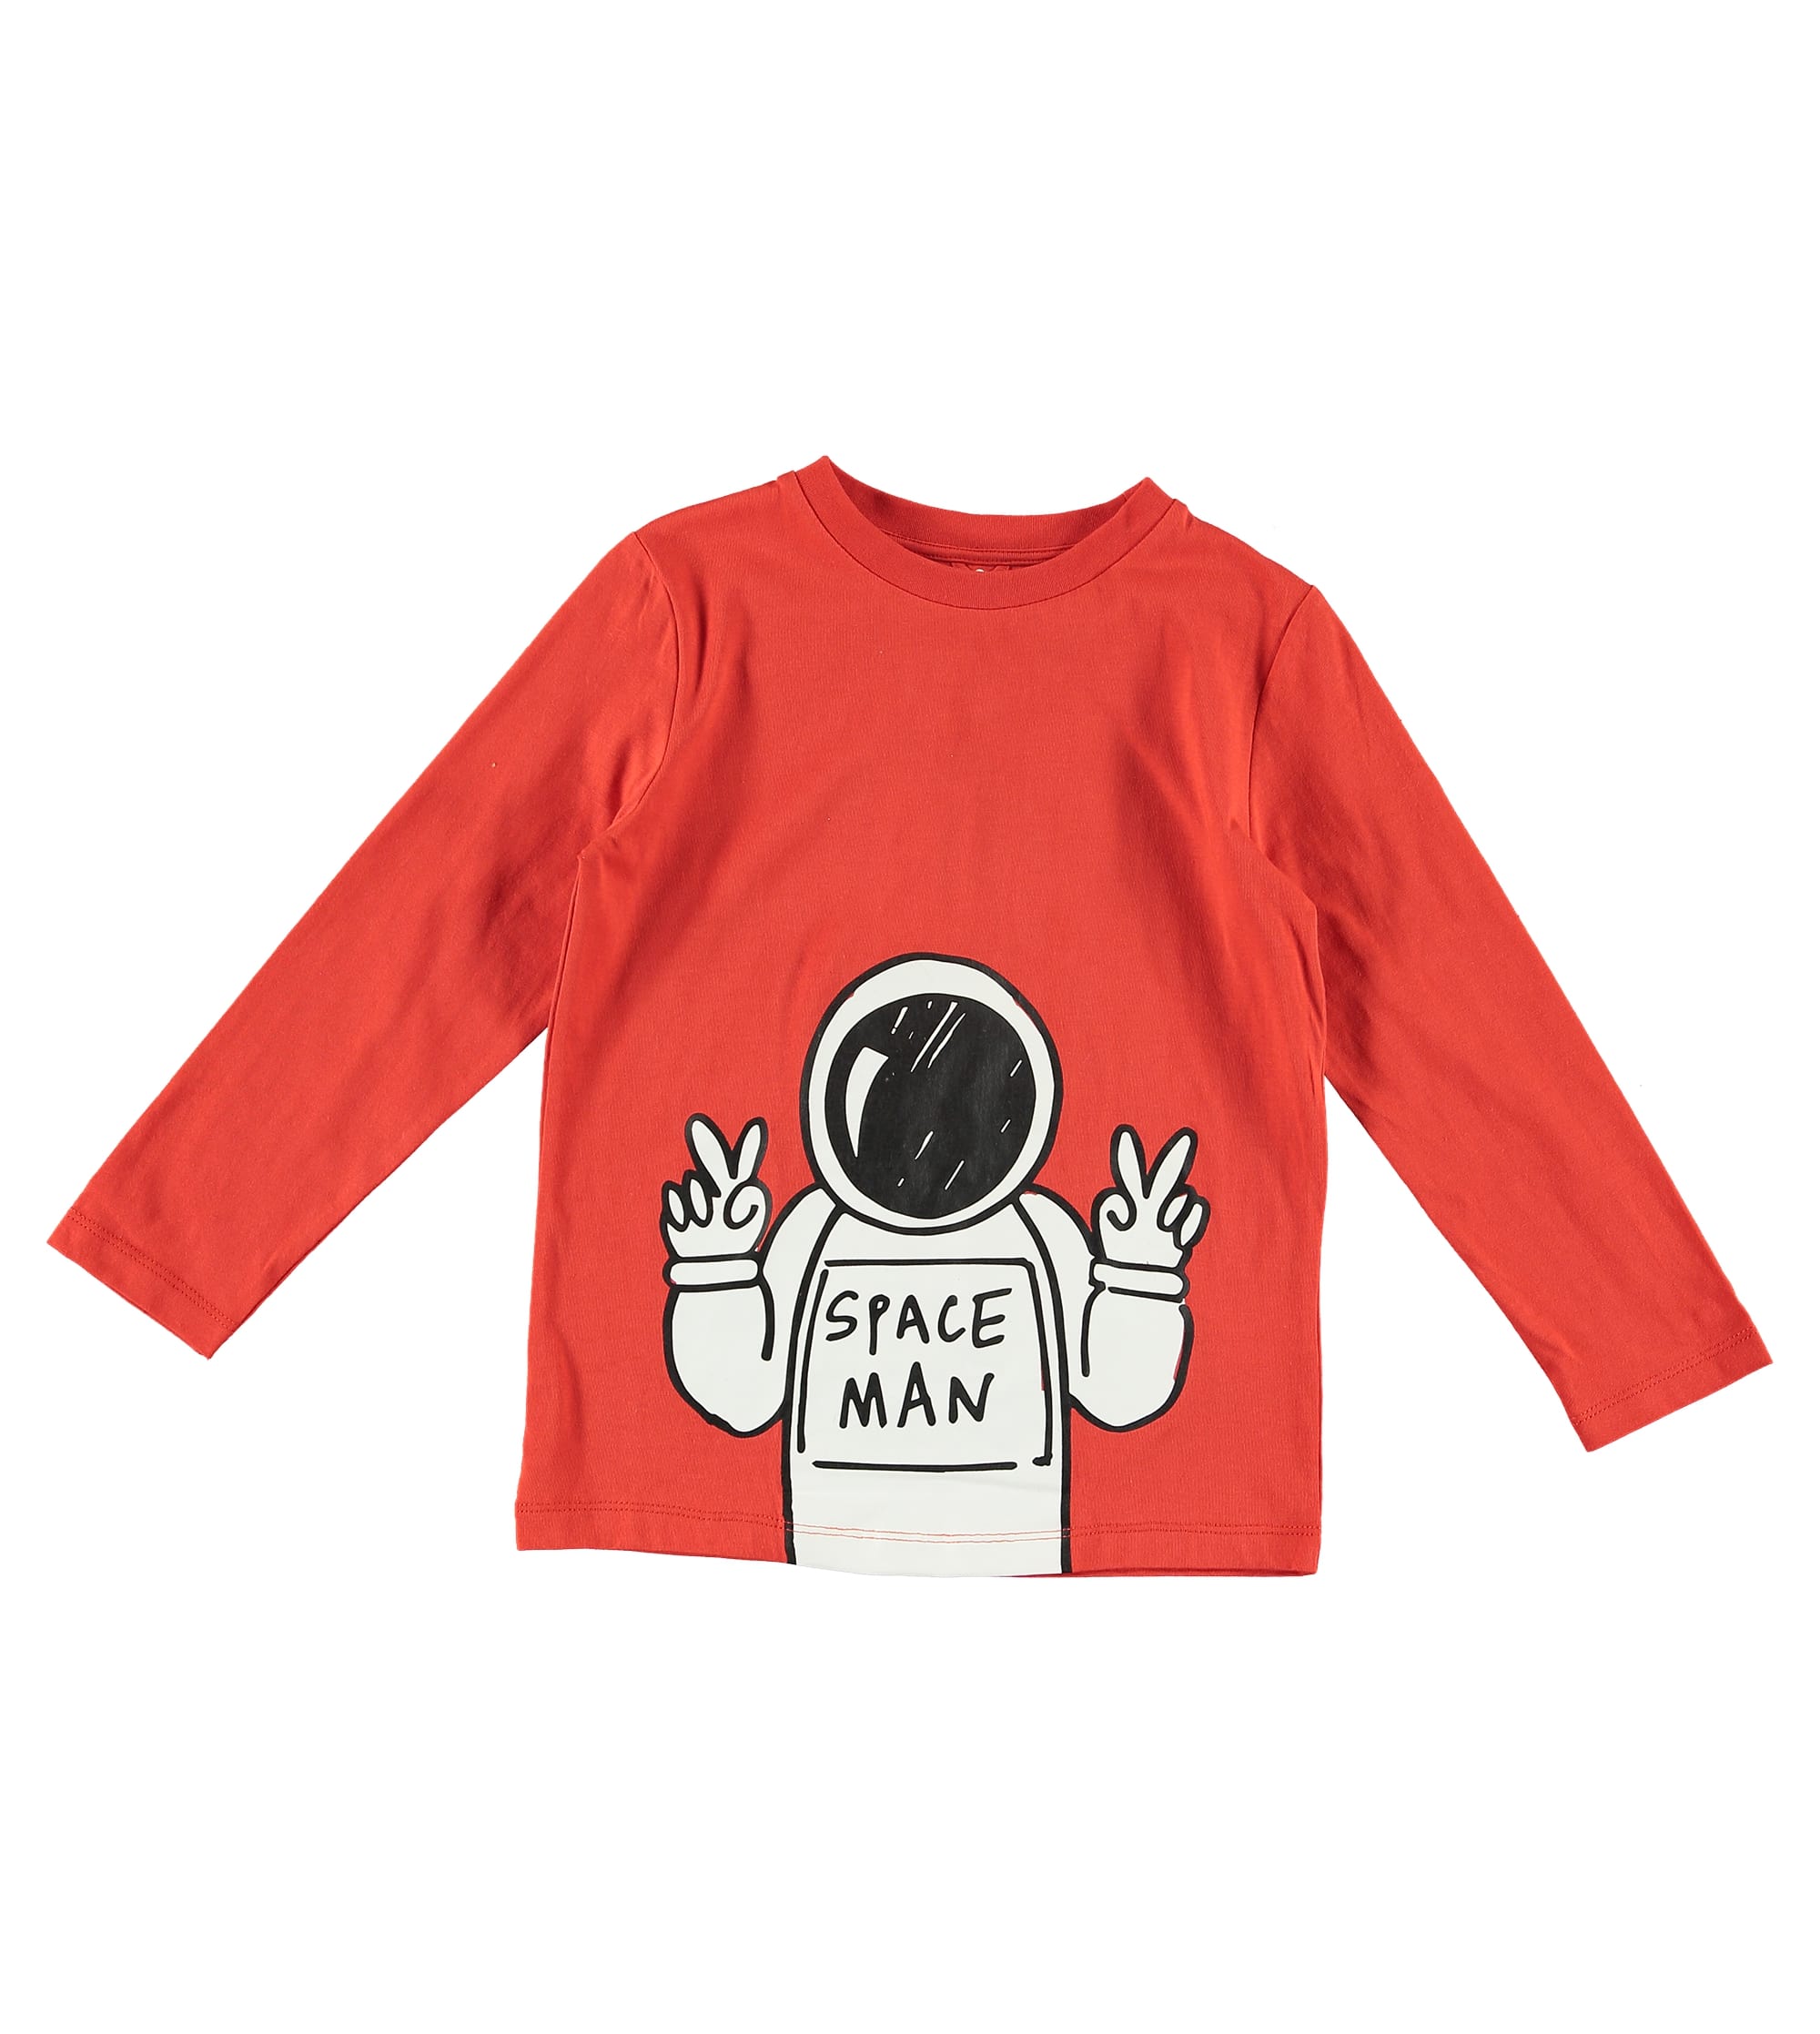 Boys Red Cotton Top